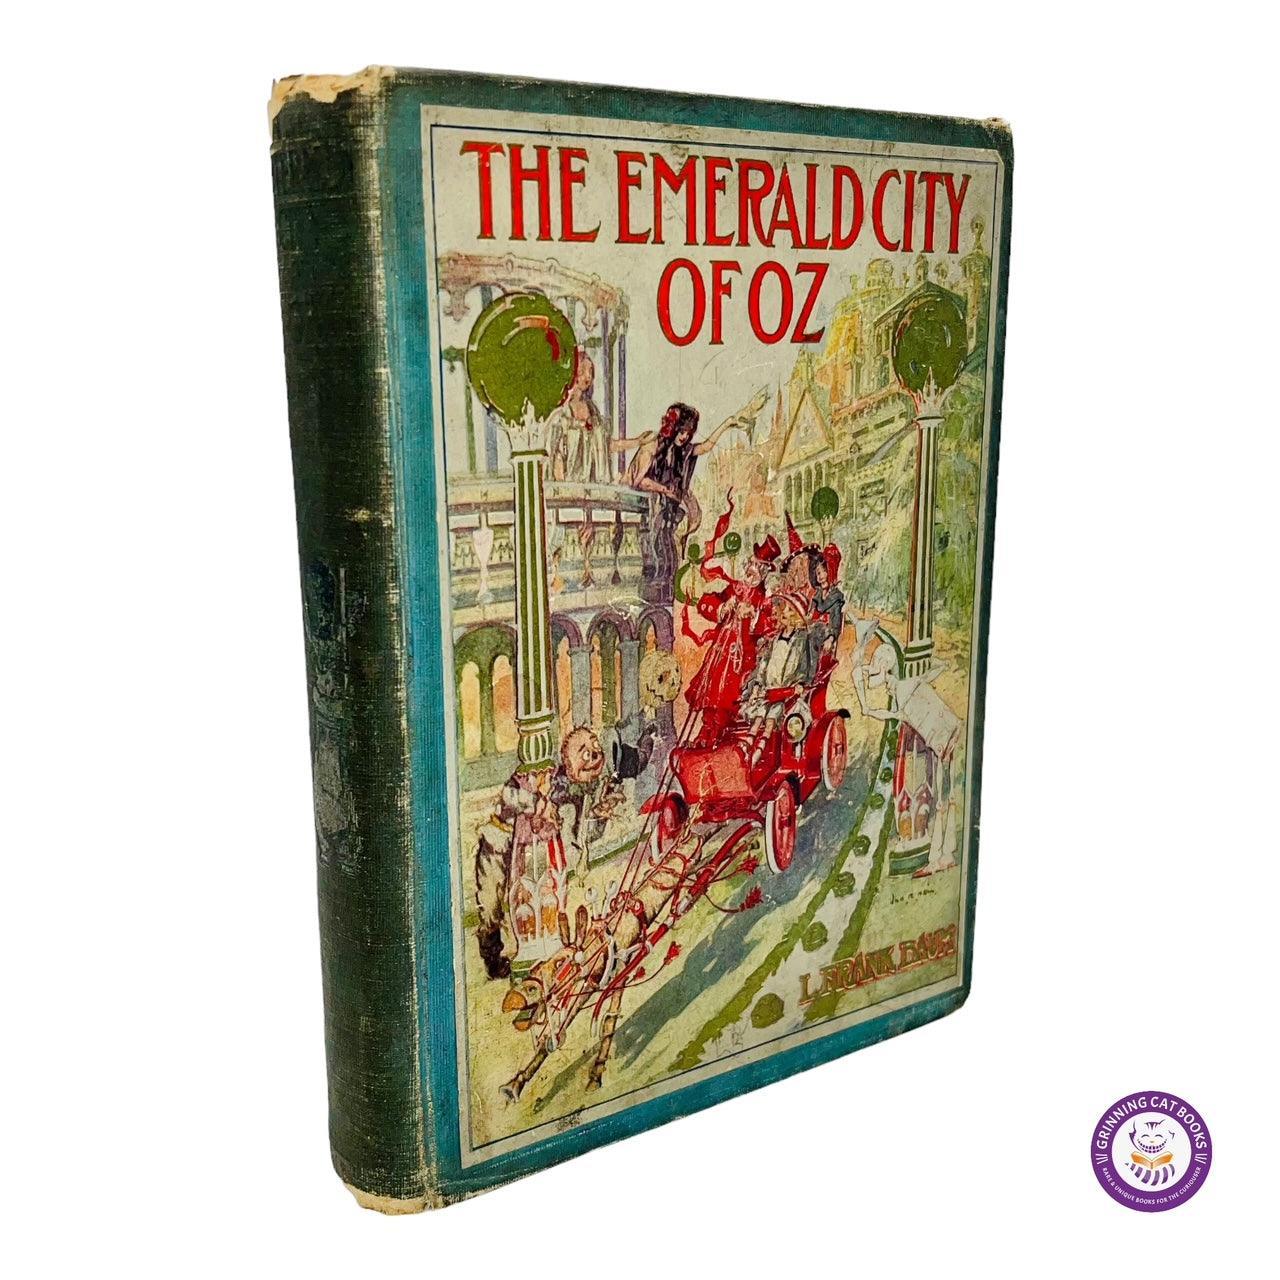 The Emerald City of Oz (1910, the special 6th "End of Oz series" title written by Baum) - Grinning Cat Books - Books - OZ